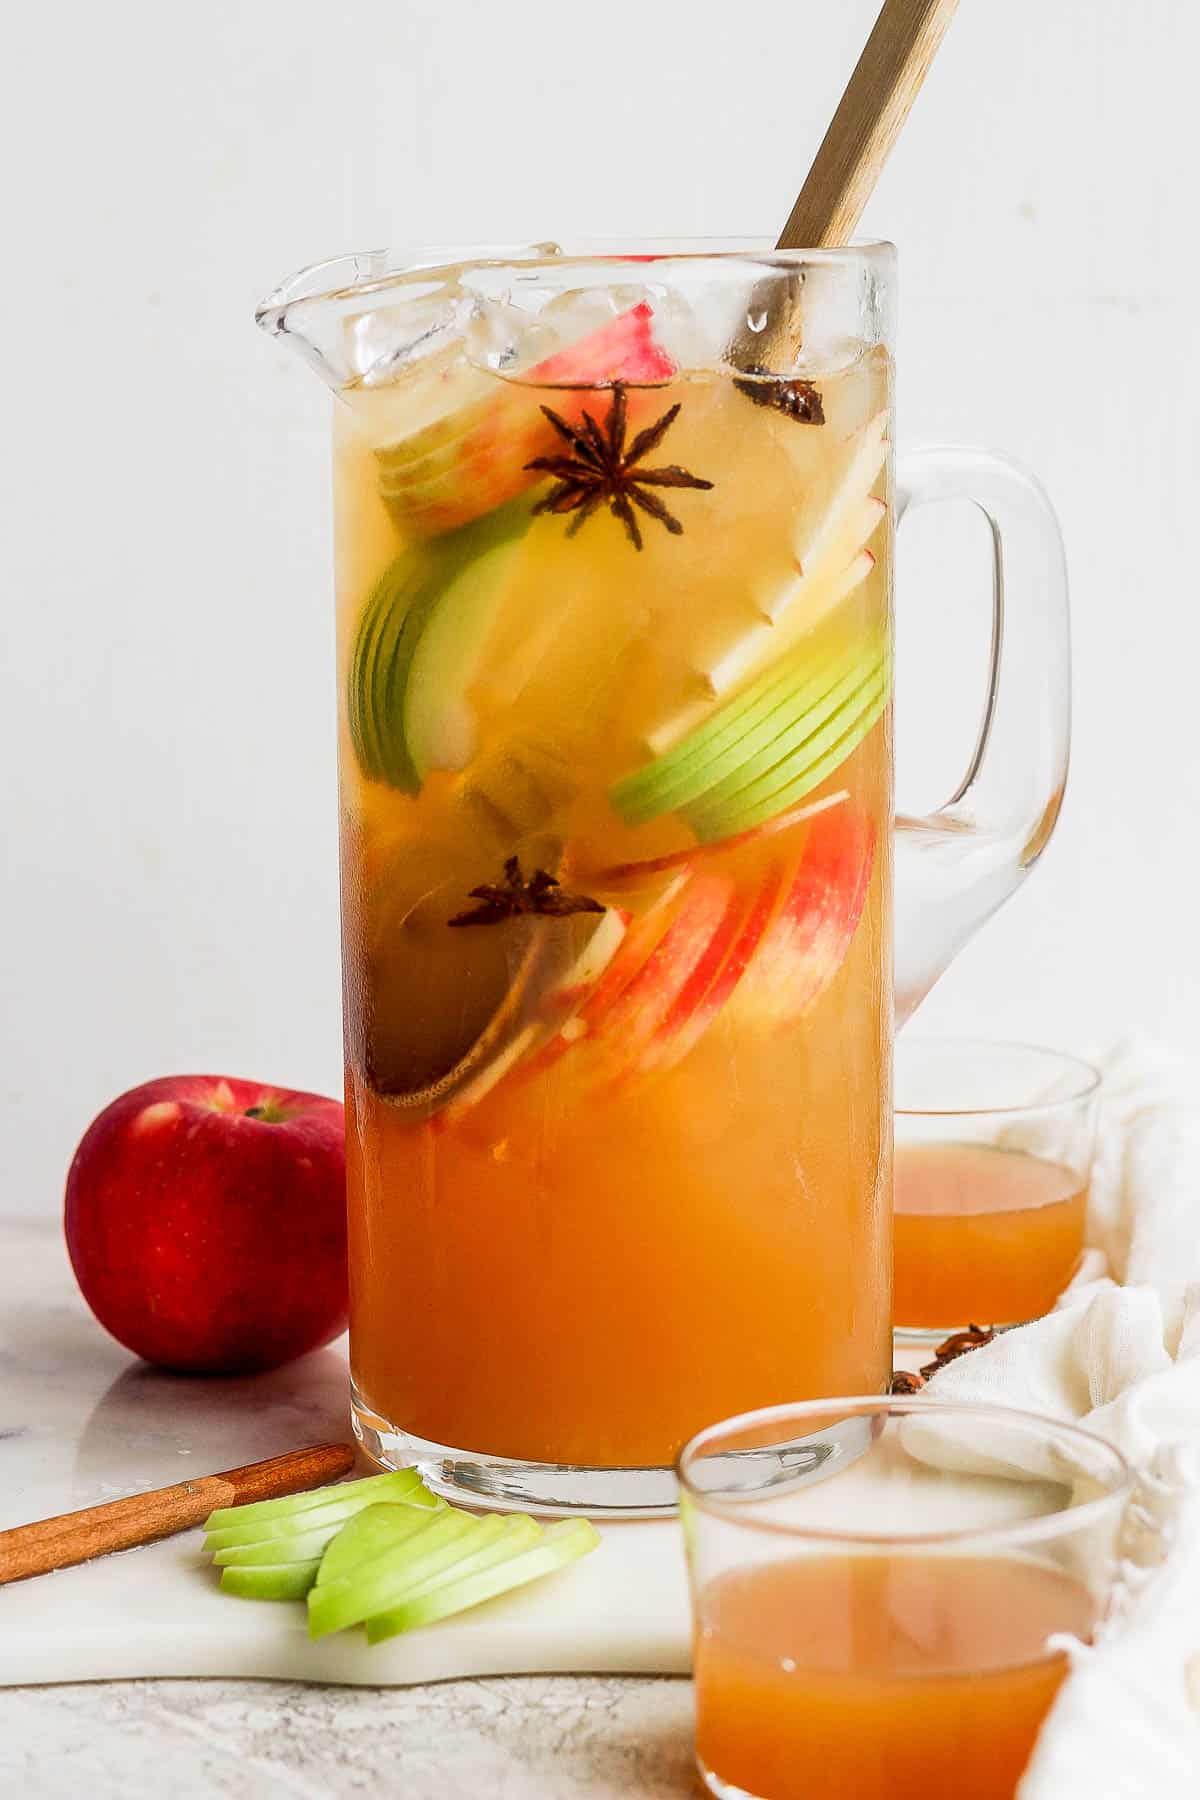 A pitcher of apple cider margarita with apple slices, star anise, and cinnamon sticks.